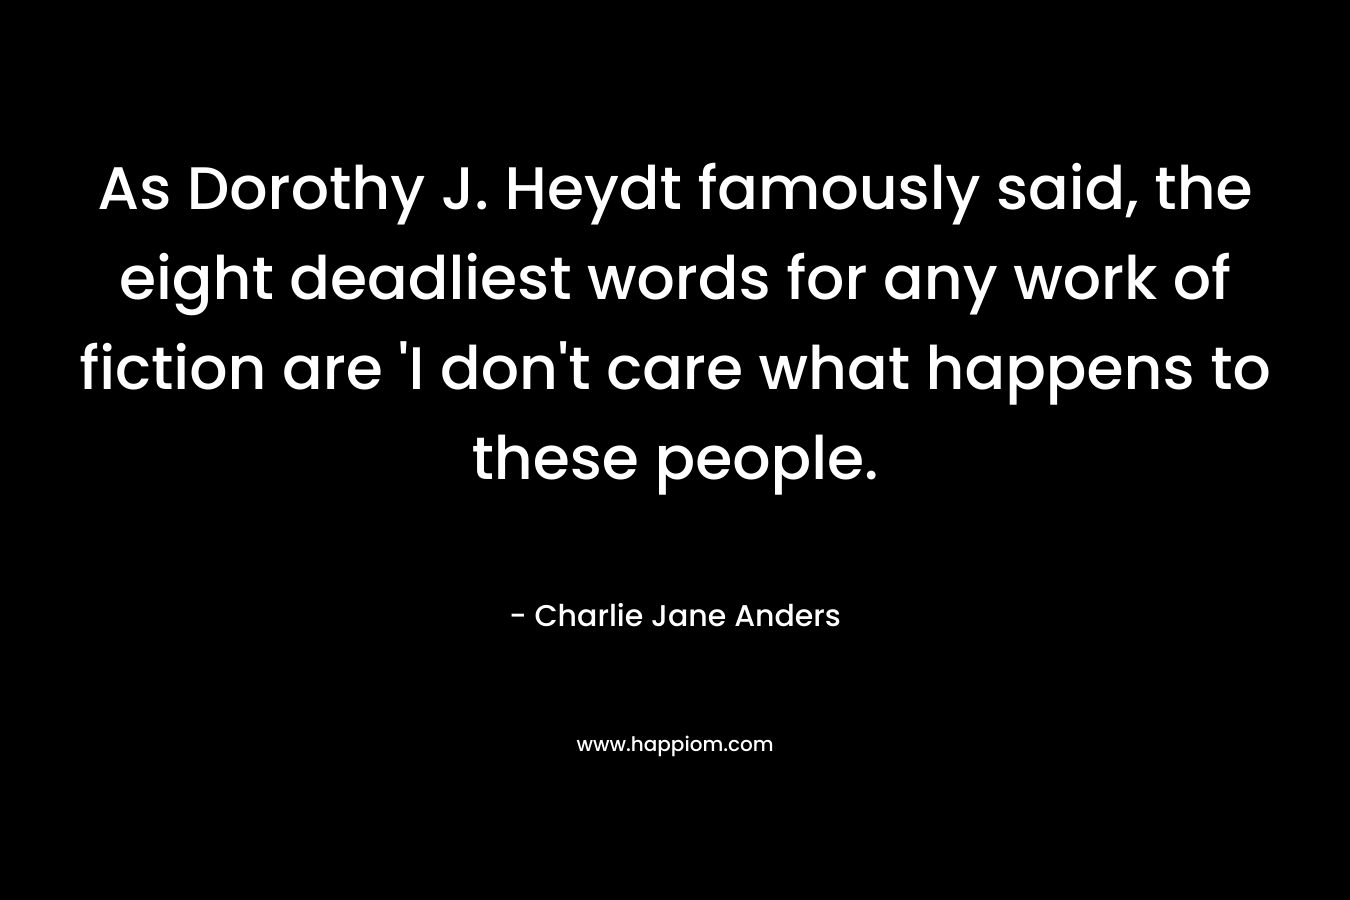 As Dorothy J. Heydt famously said, the eight deadliest words for any work of fiction are ‘I don’t care what happens to these people. – Charlie Jane Anders